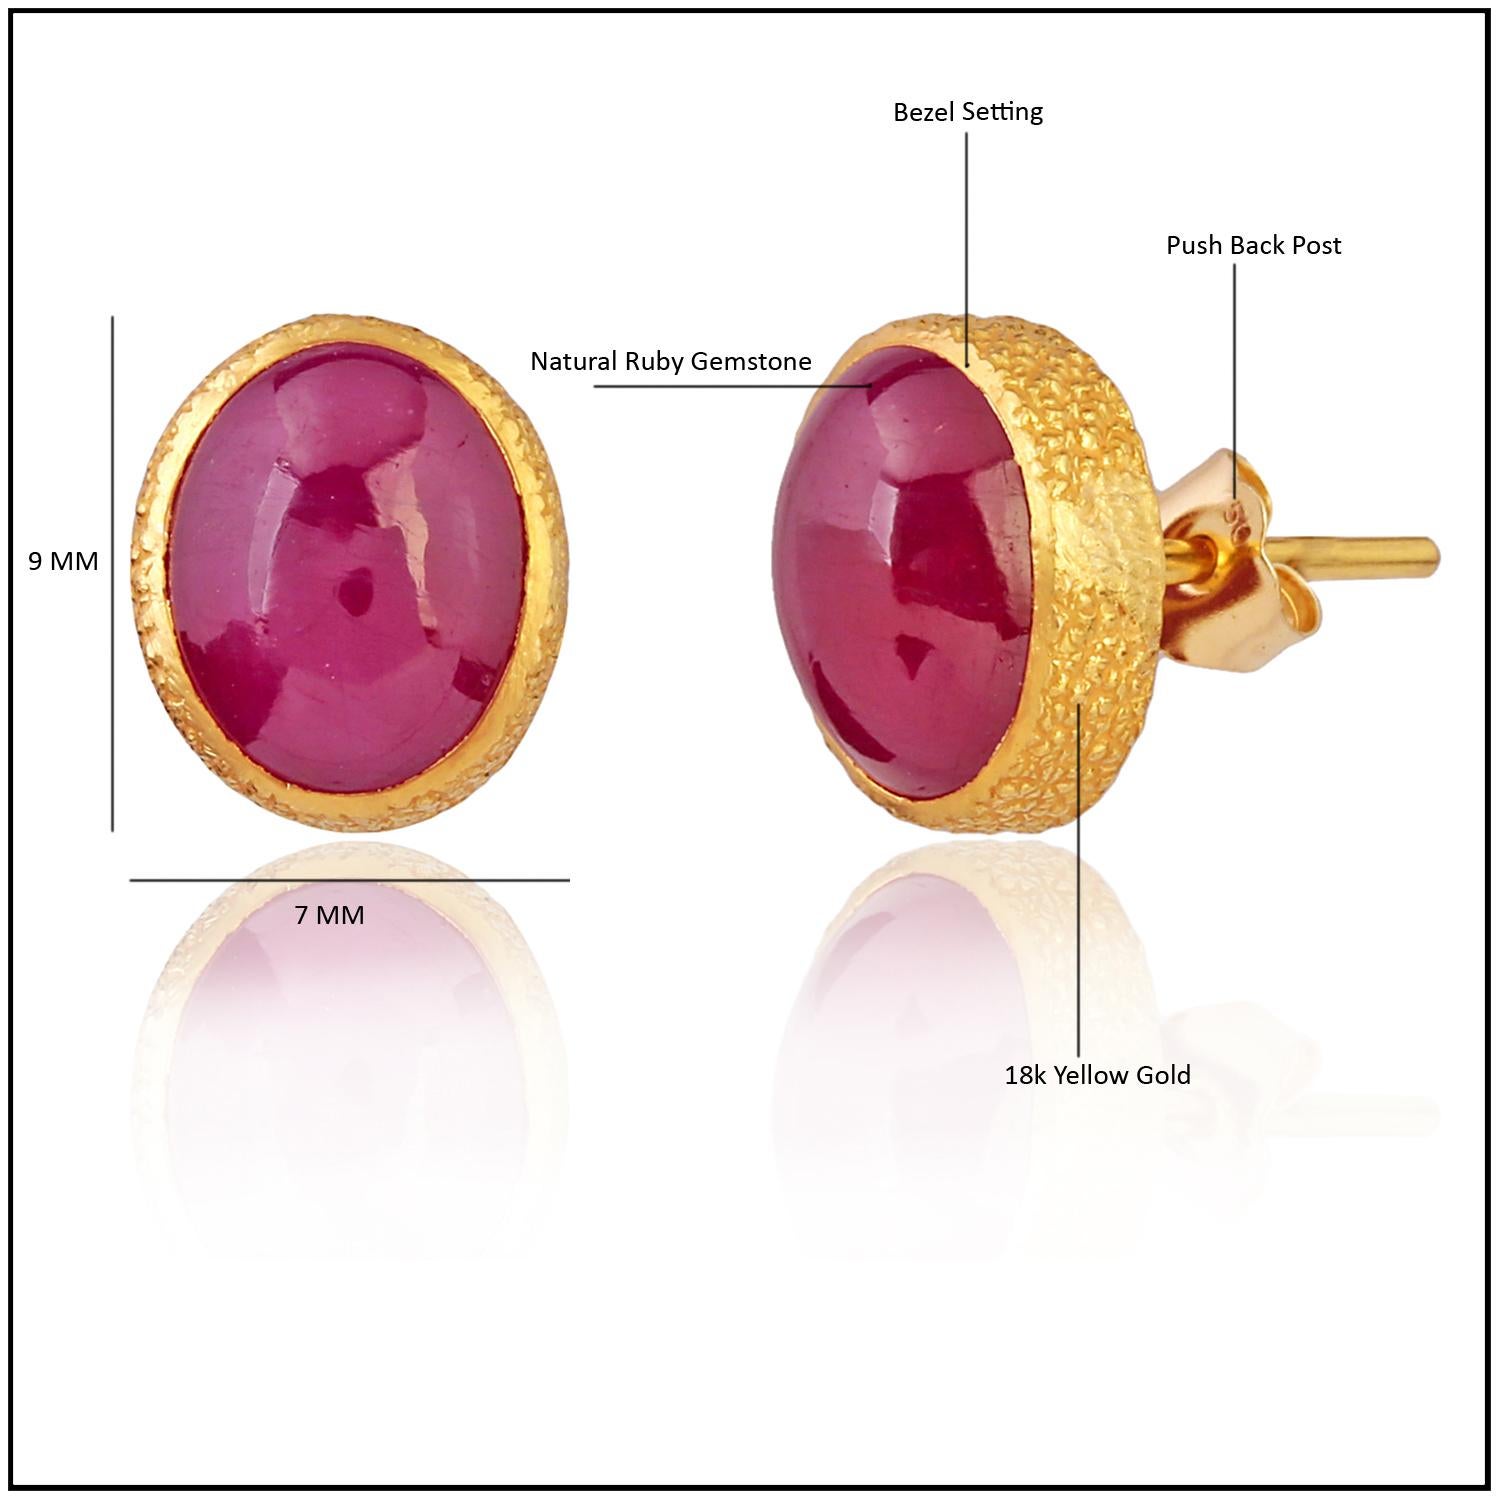 A stunning diamond oval shape stud earrings featured solid 18k yellow gold and set with precious gemstone Ruby, the perfect collection for fine jewelry.

Specifications

Dimensions: 11*9 MM
Gross Weight: 3.210 gms
Gold Weight: 1.494 gms
Gold Purity: